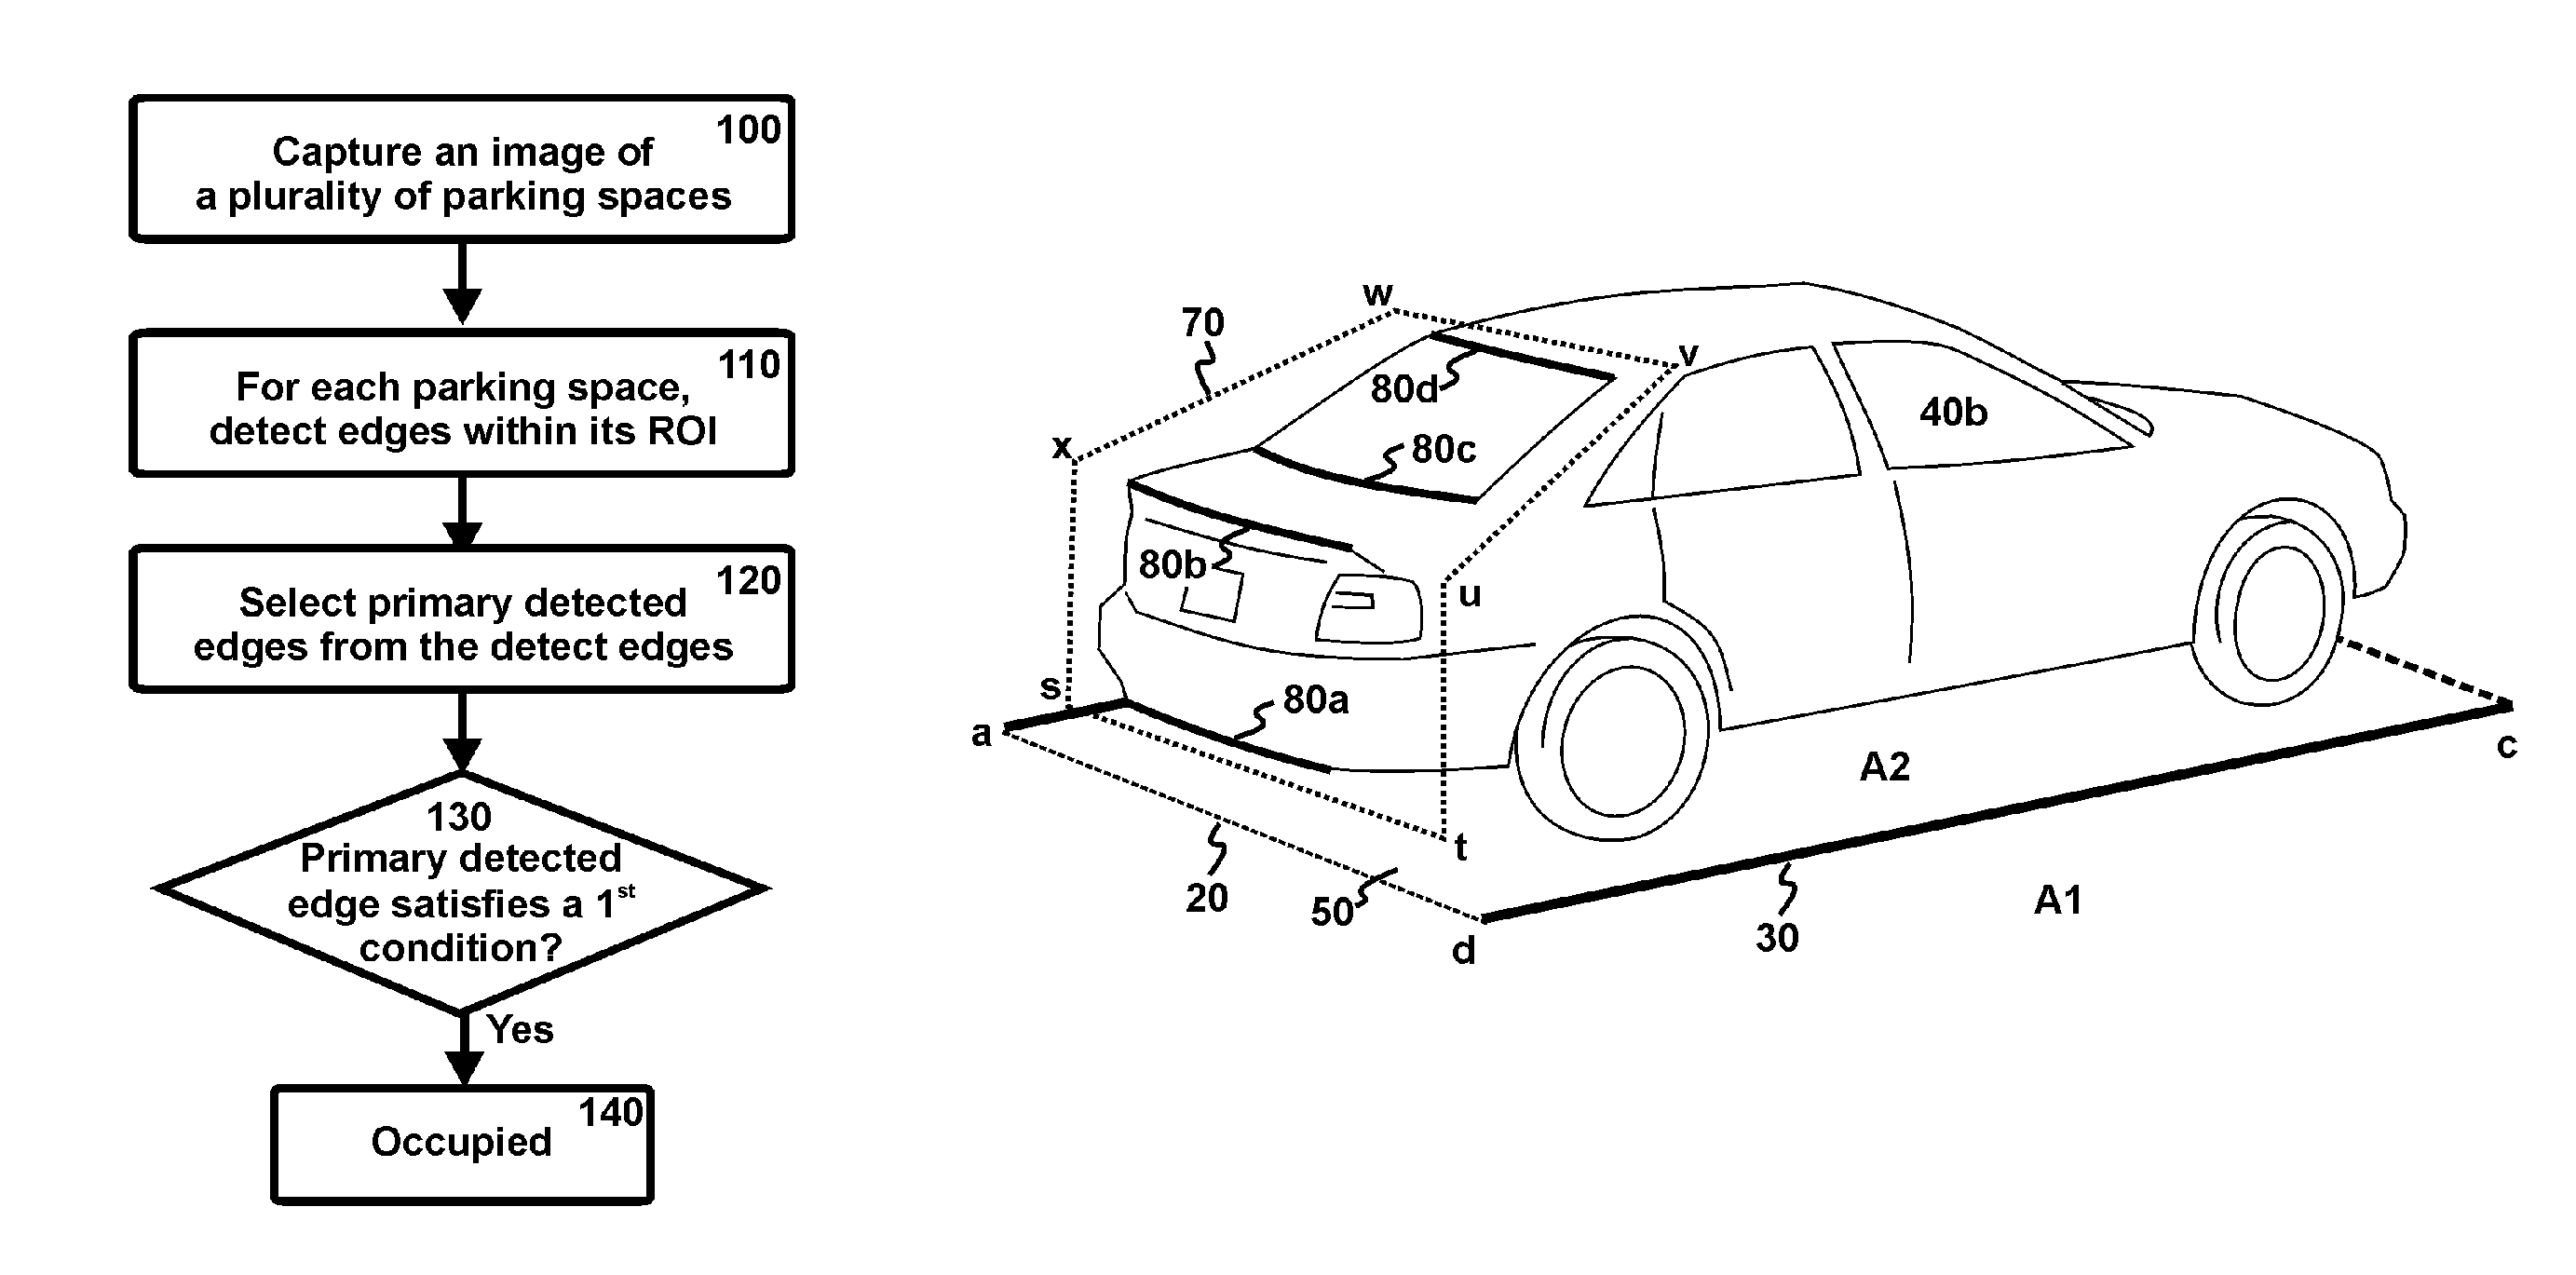 Parked vehicle detection based on edge detection